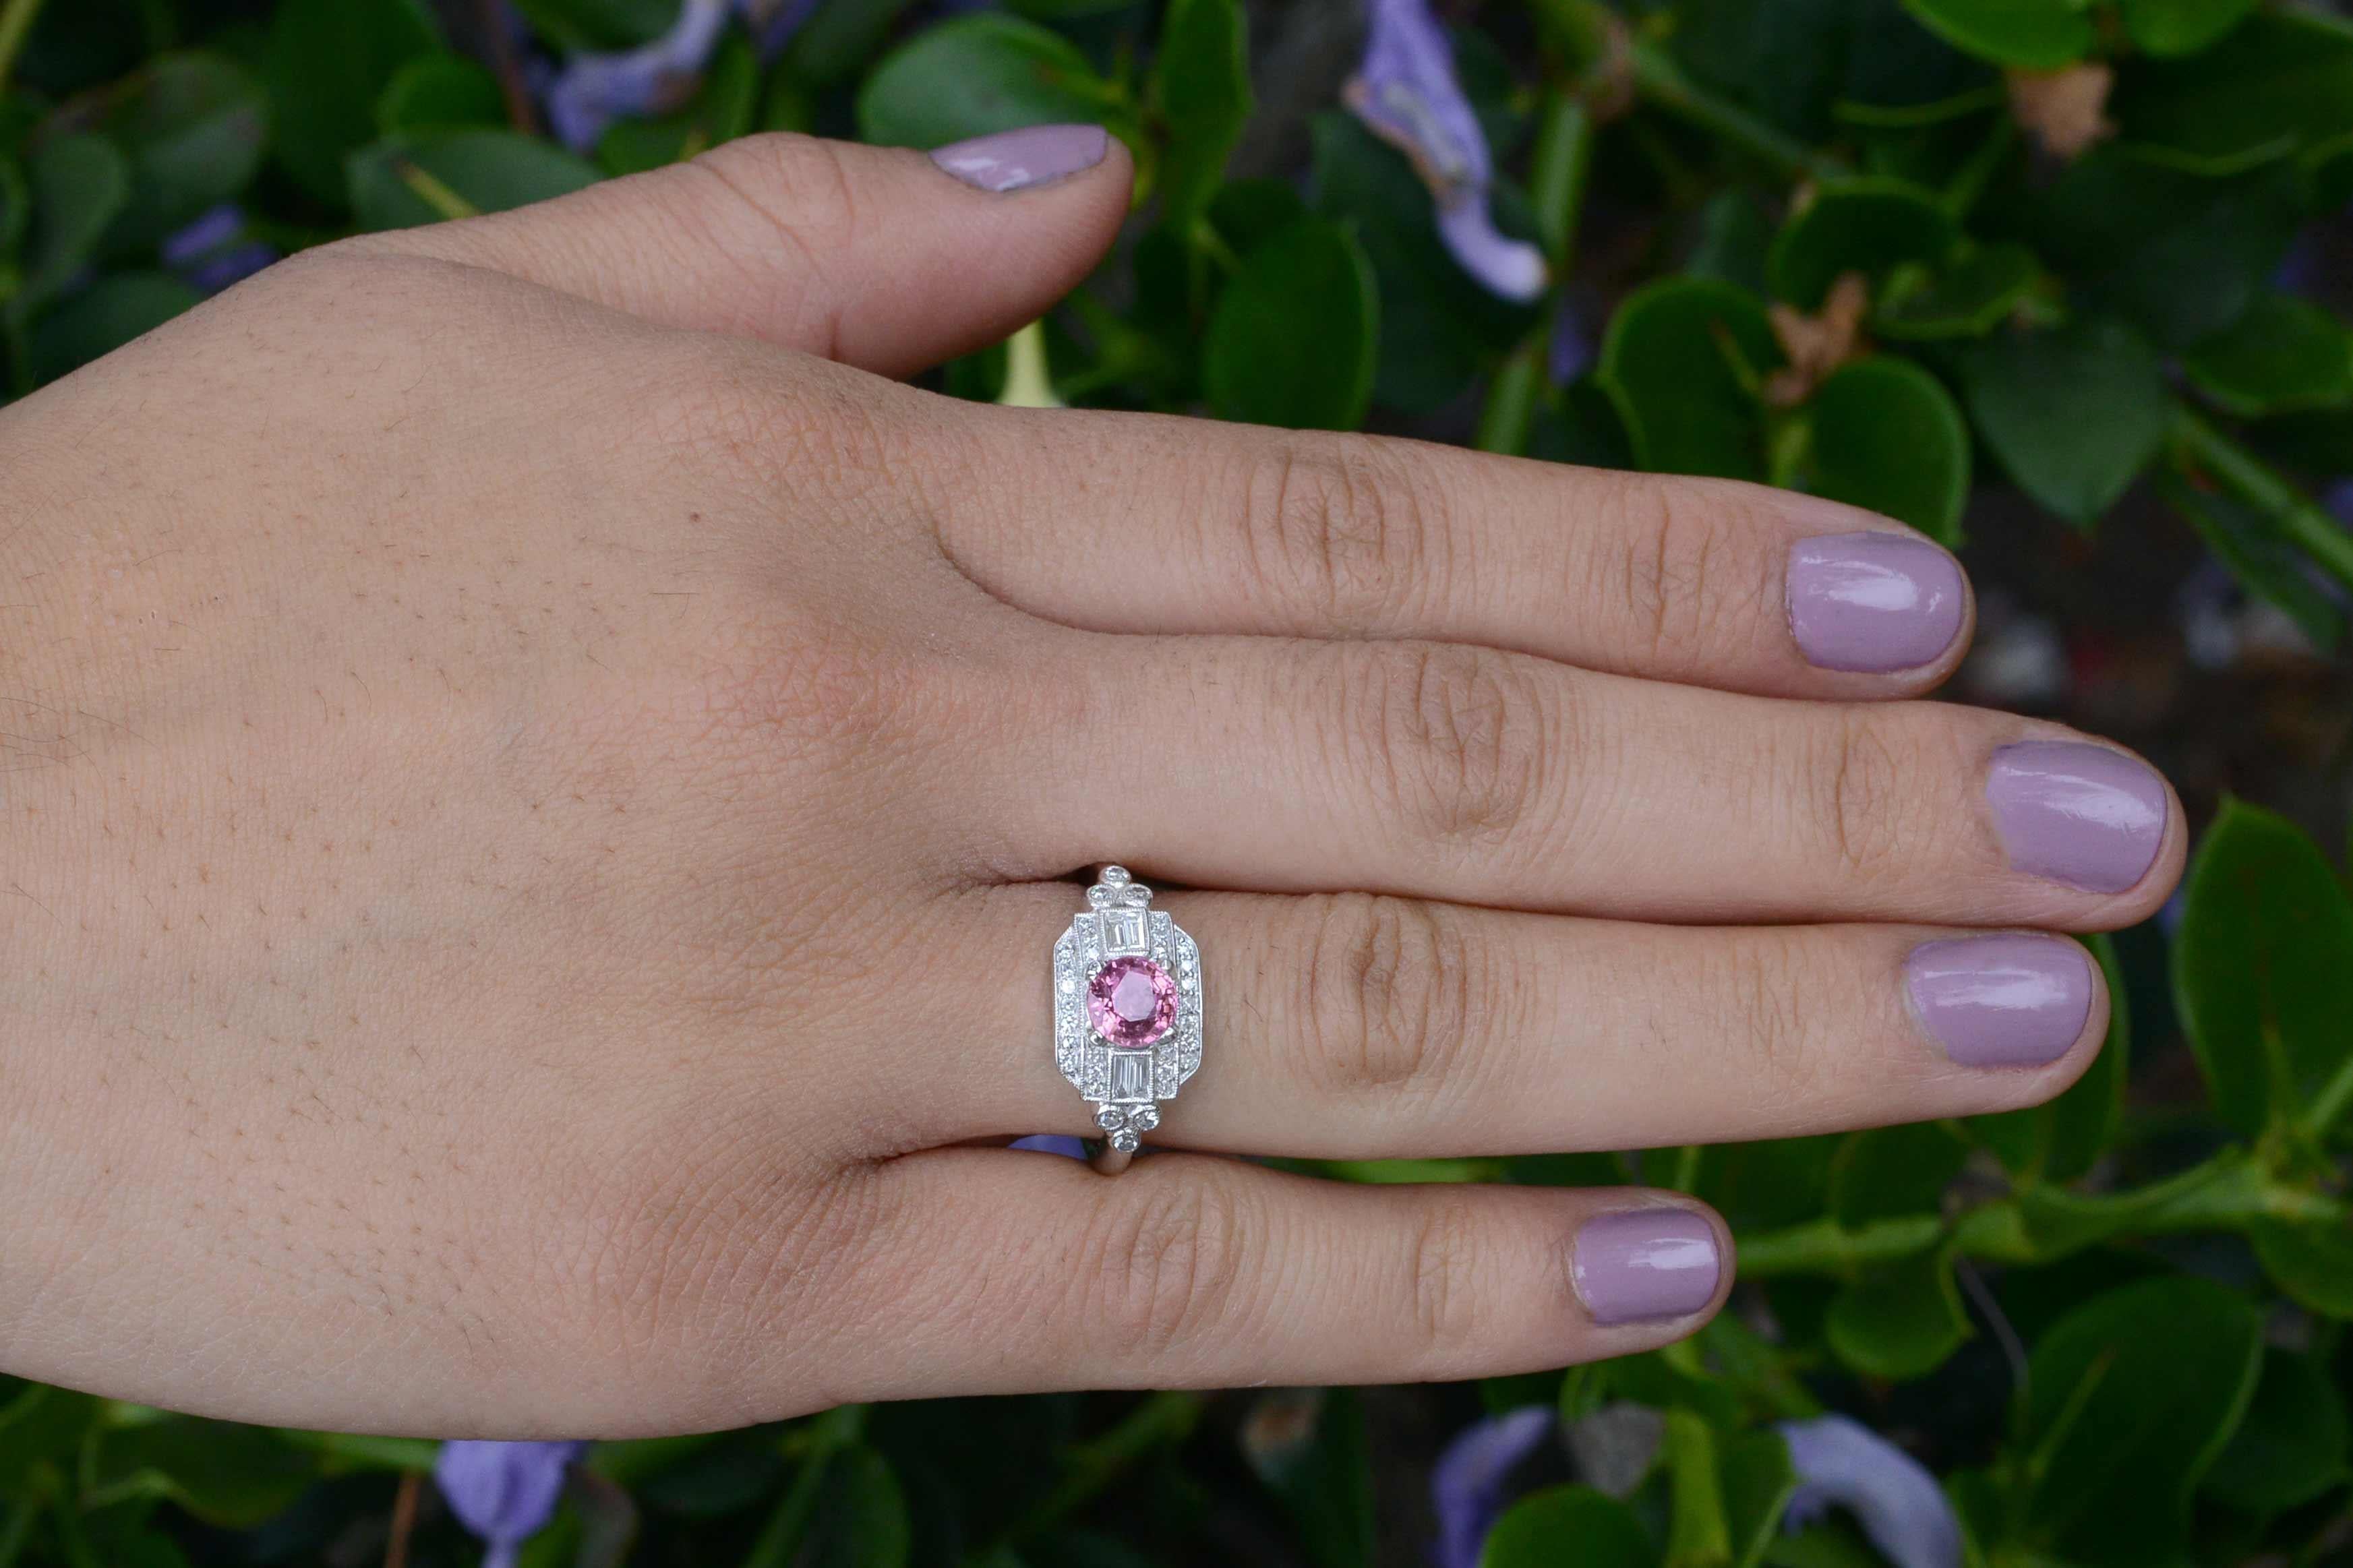 This sleek and beautiful Art Deco revival gemstone and diamond engagement ring checks all the boxes. Centering on a juicy, richly saturated natural Pink Sapphire with a soft but rich color in a highly detailed 14k white gold Deco style setting